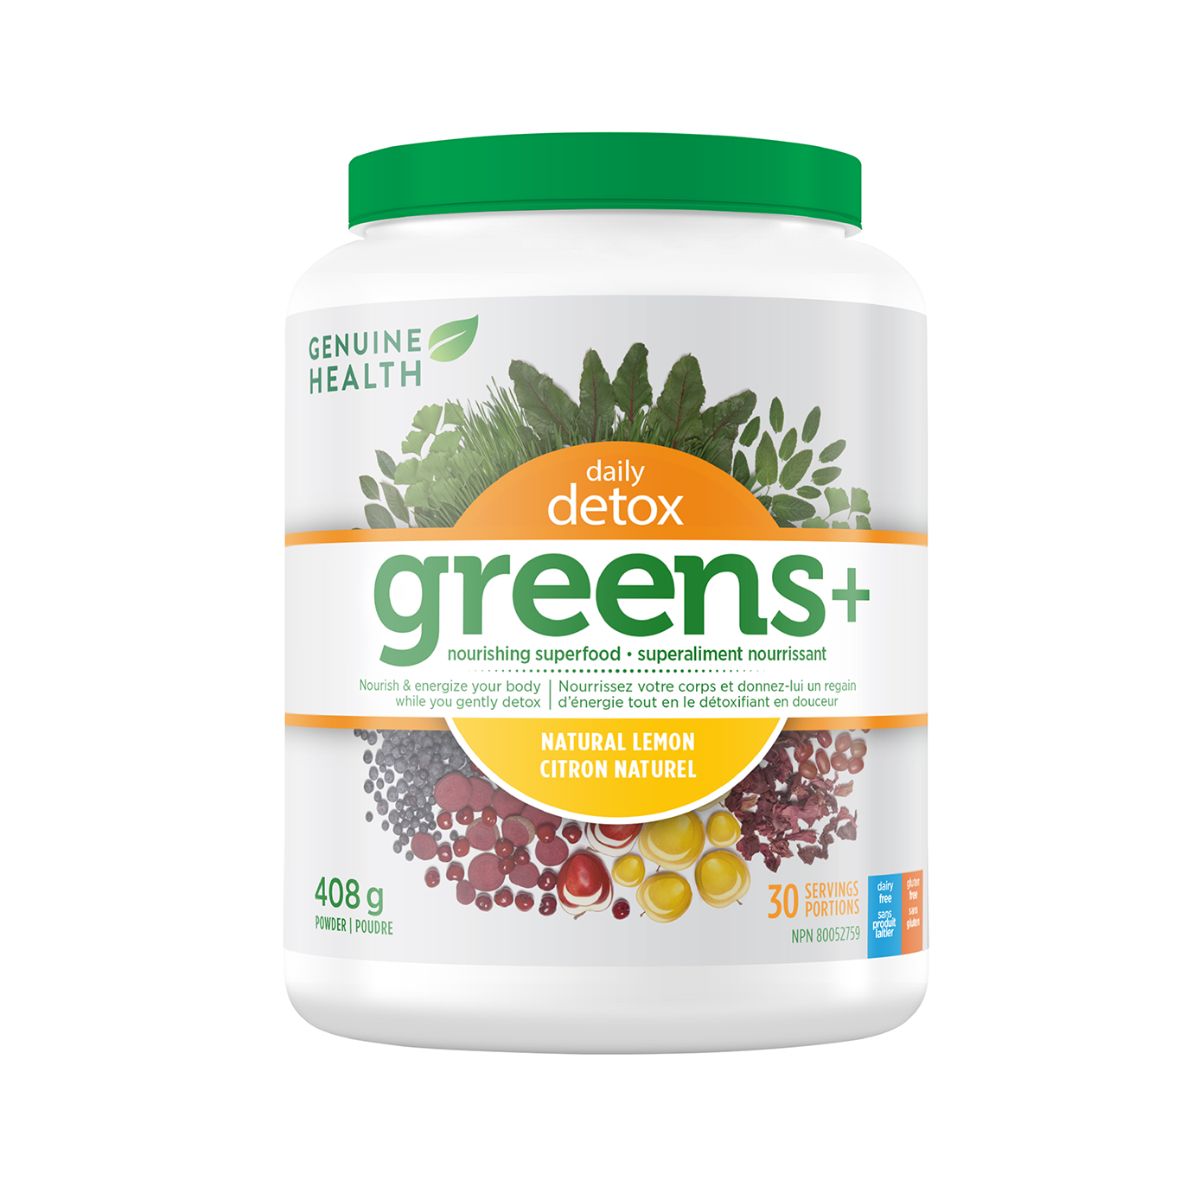 Genuine Health Greens+ Daily Detox - Natural Lemon 408g product image - Green superfood supplement in a green and white plastic tub